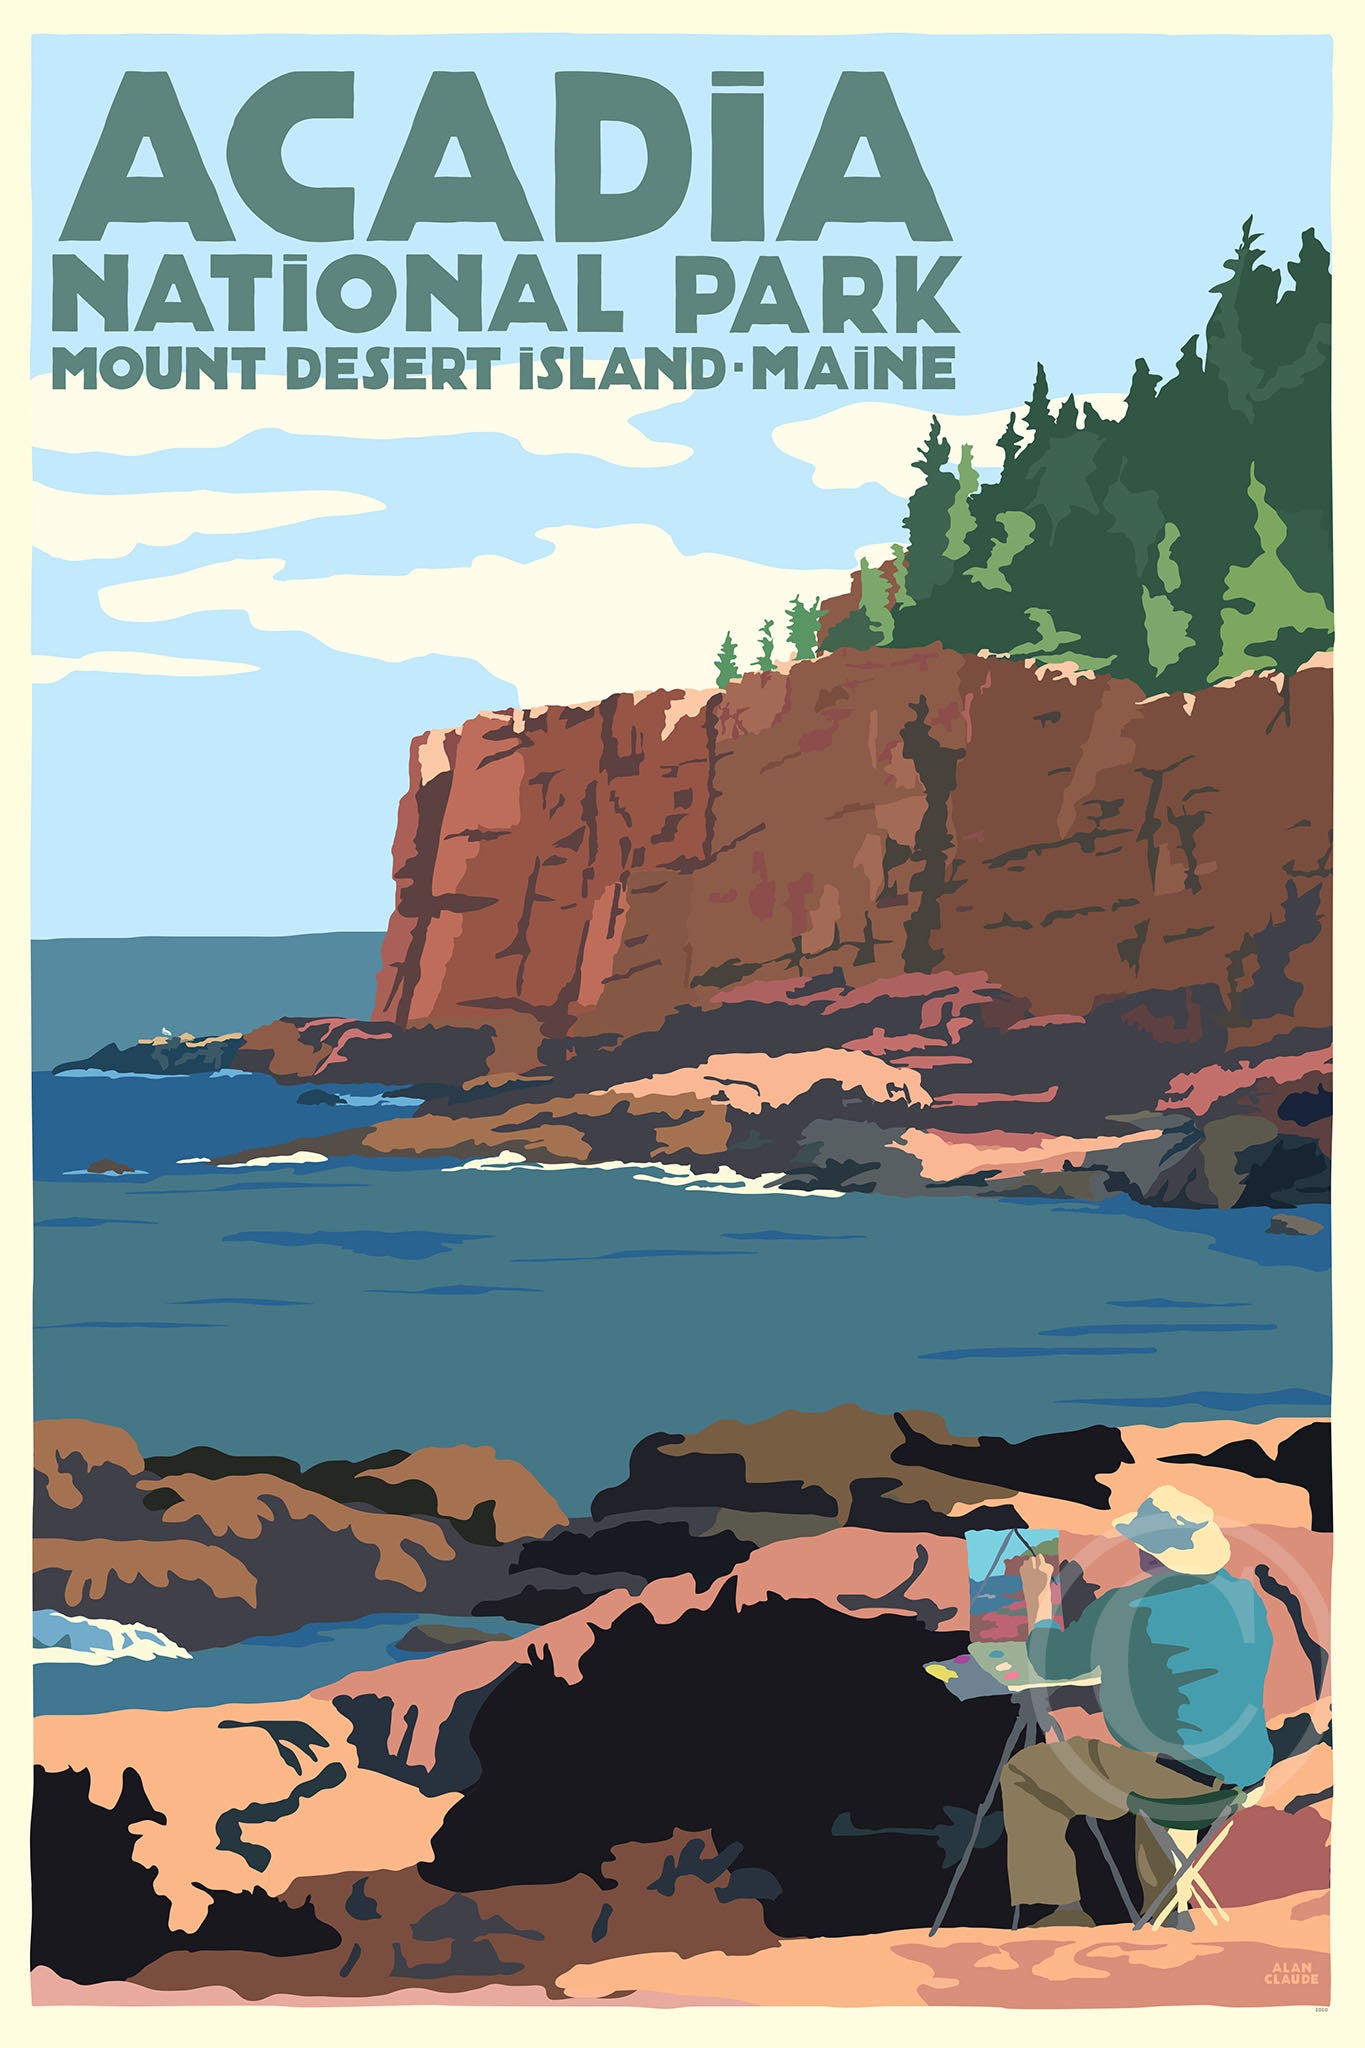 Painting In Acadia National Park Art Print 24" x 36" Wall Poster By Alan Claude - Maine